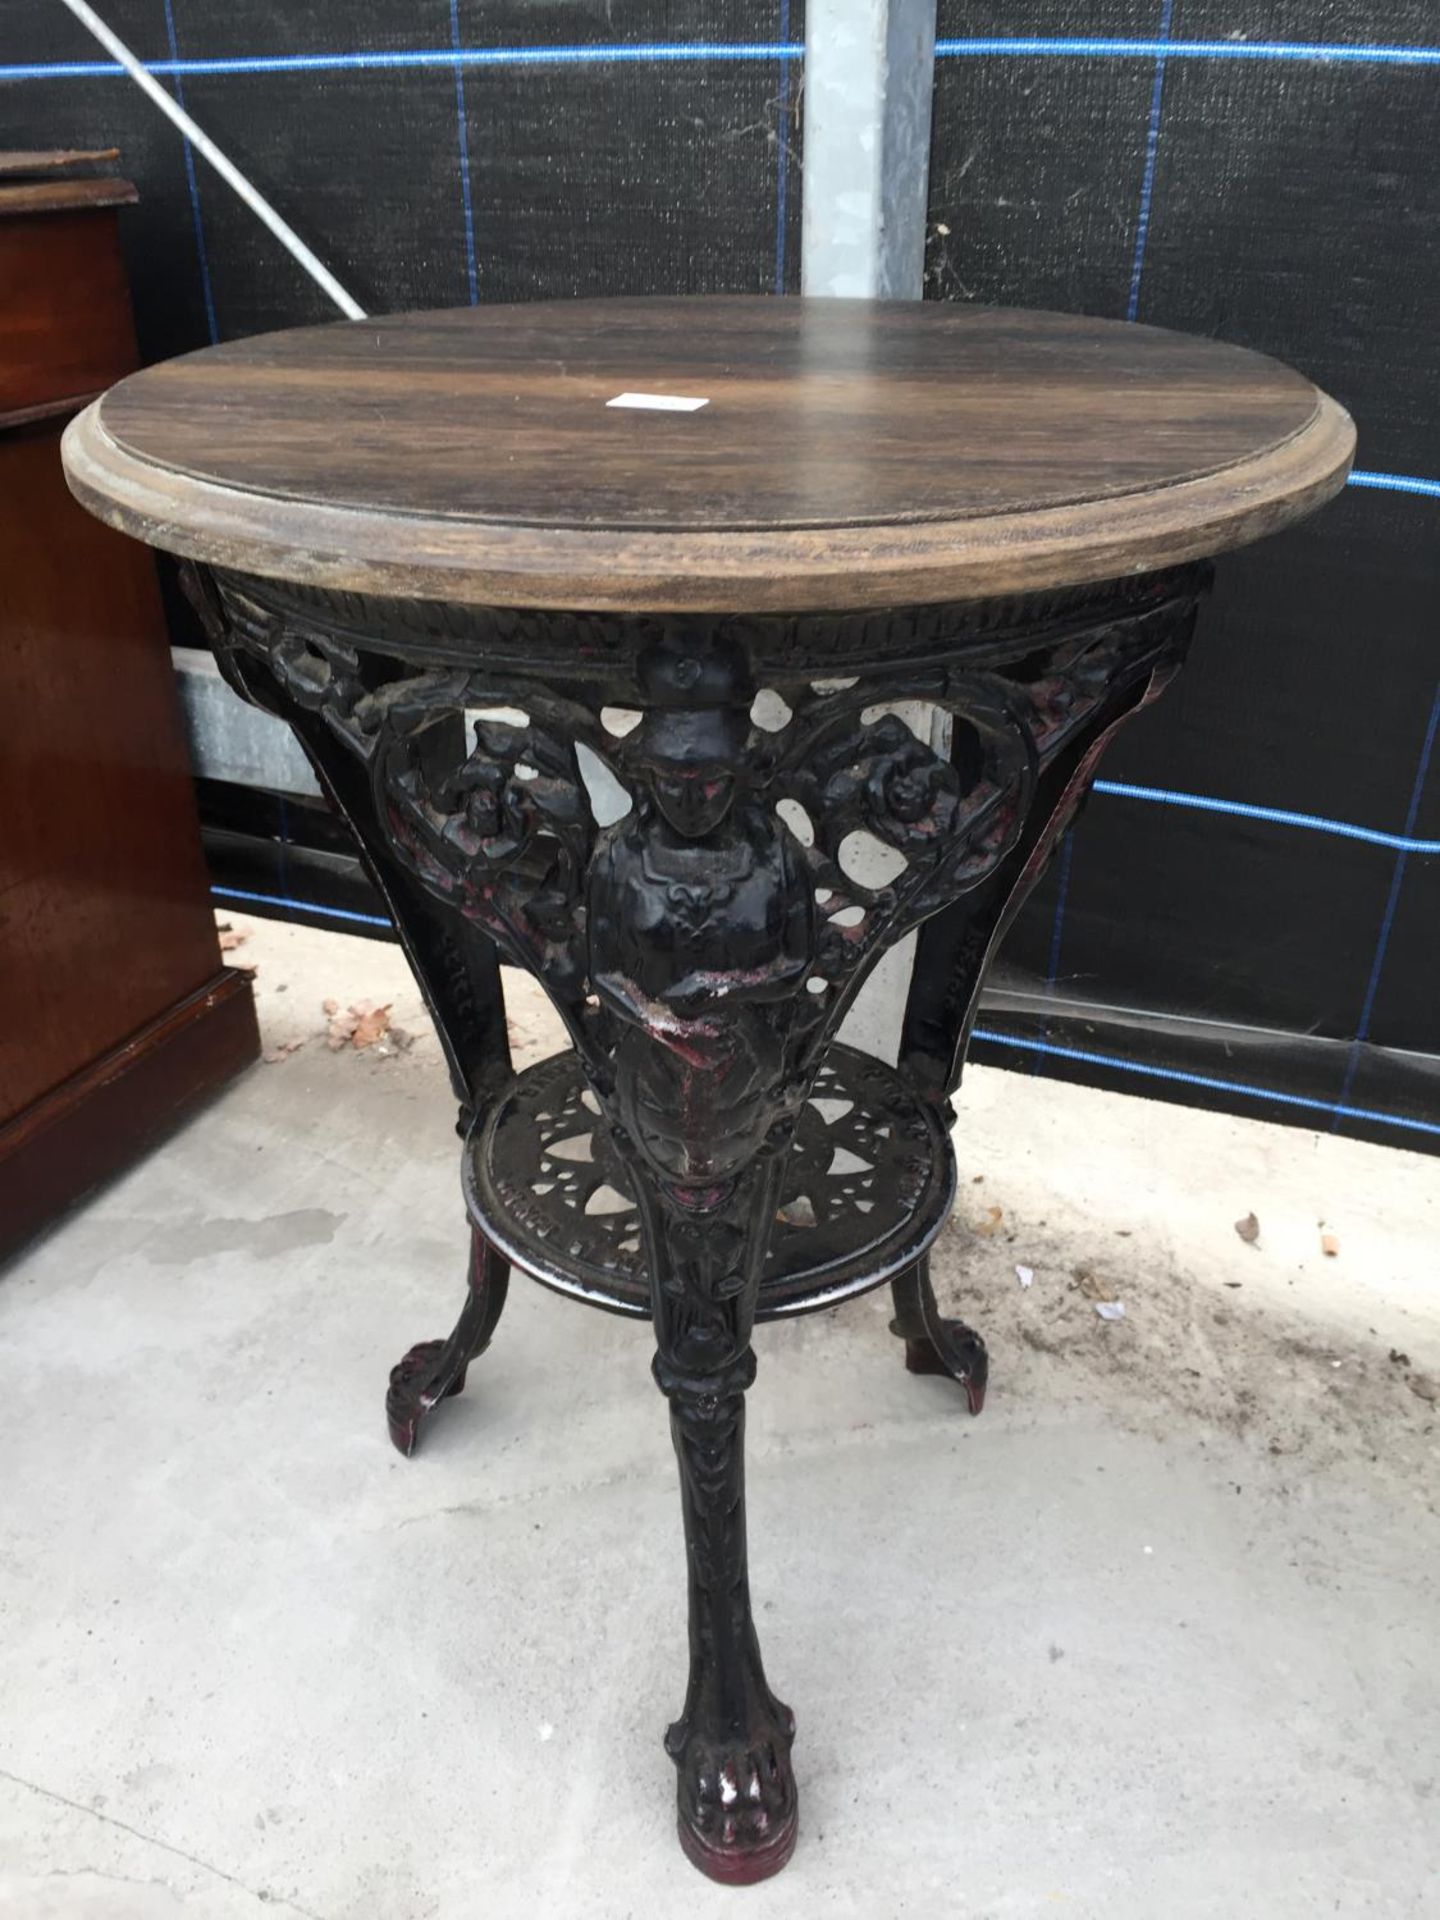 A VICTORIAN STYLE CAST ALLOY PUB TABLE